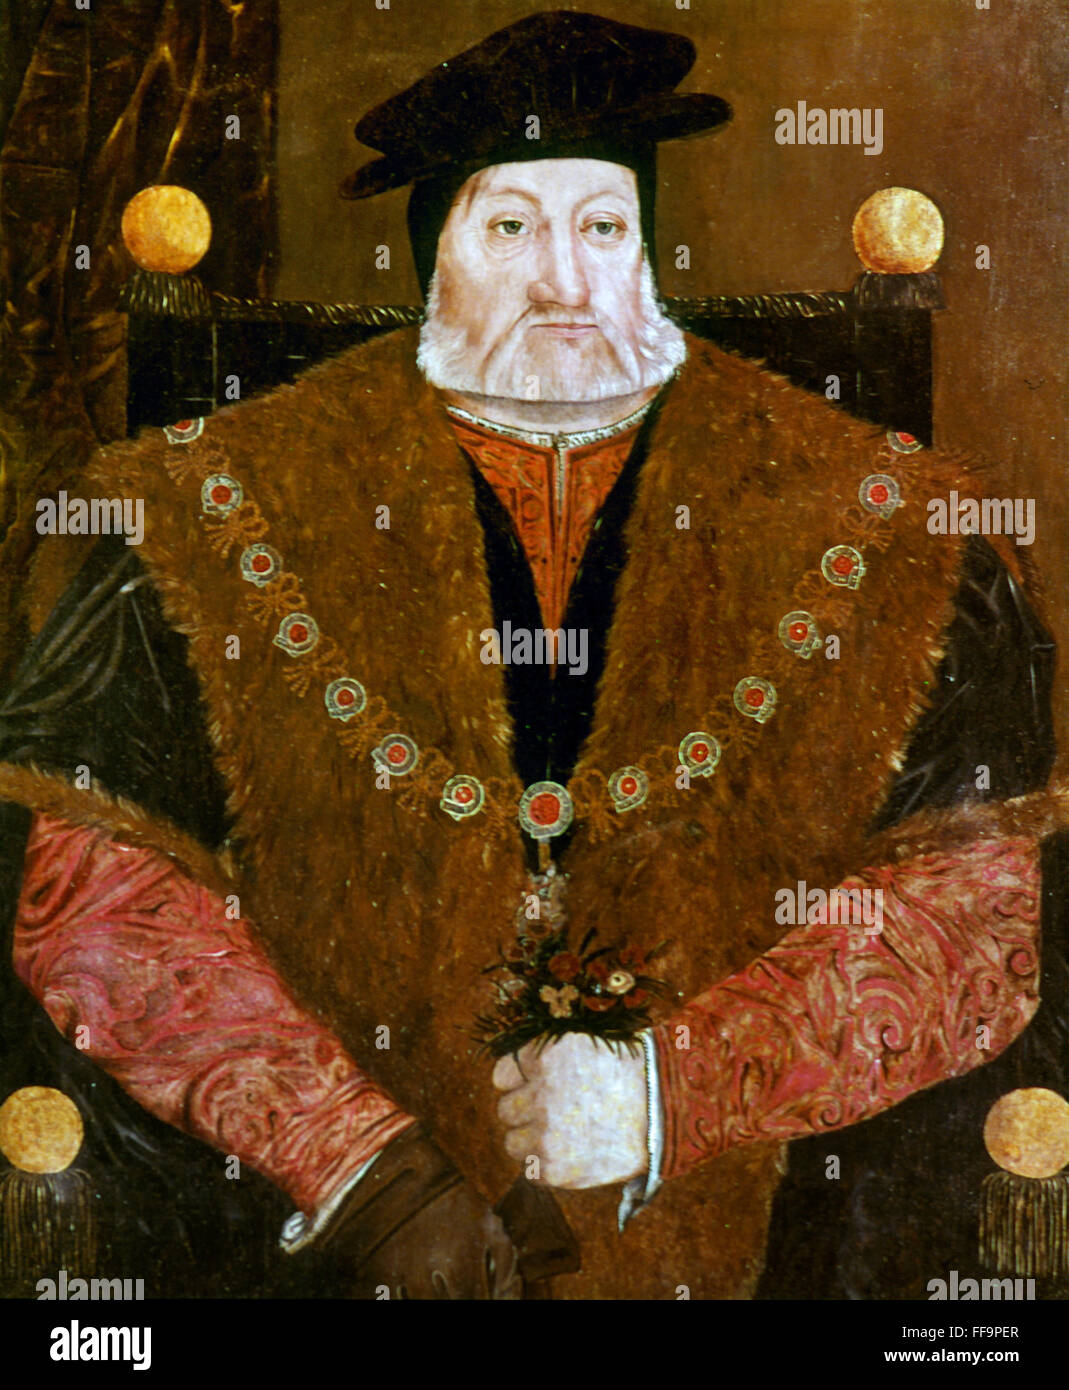 CHARLES BRANDON /n(c1484-1545). 1st Duke of Suffolk. English soldier and statesman. Oil on panel by an unknown artist, late 16th century. Stock Photo